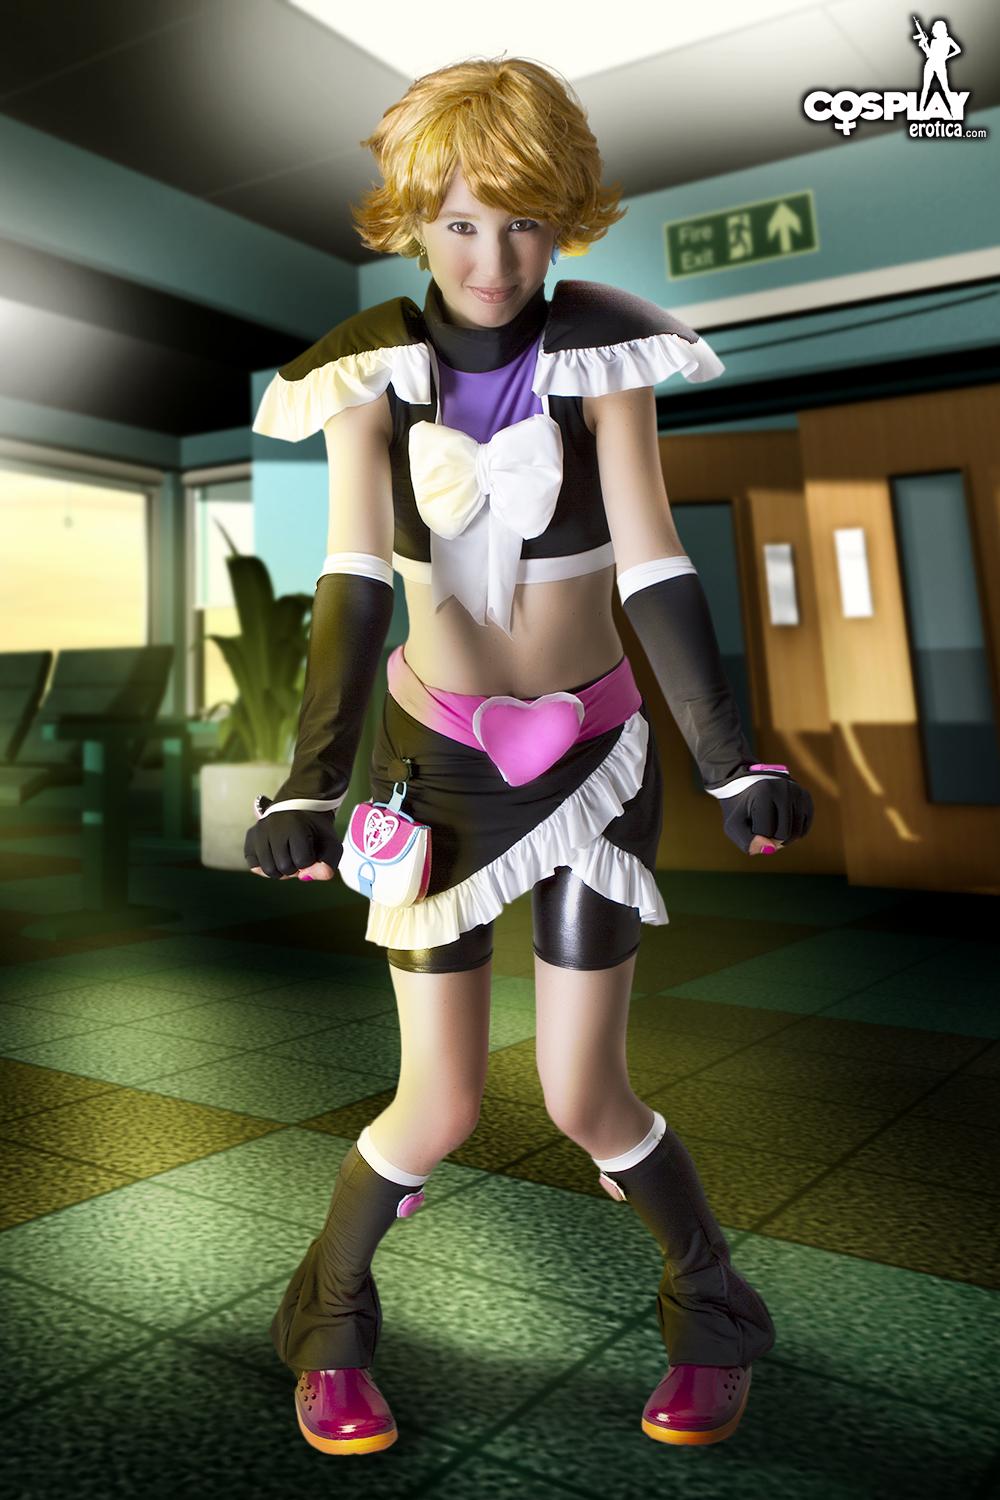 Cosplay hottie stacy strisce in un set anime sexy
 #60007681